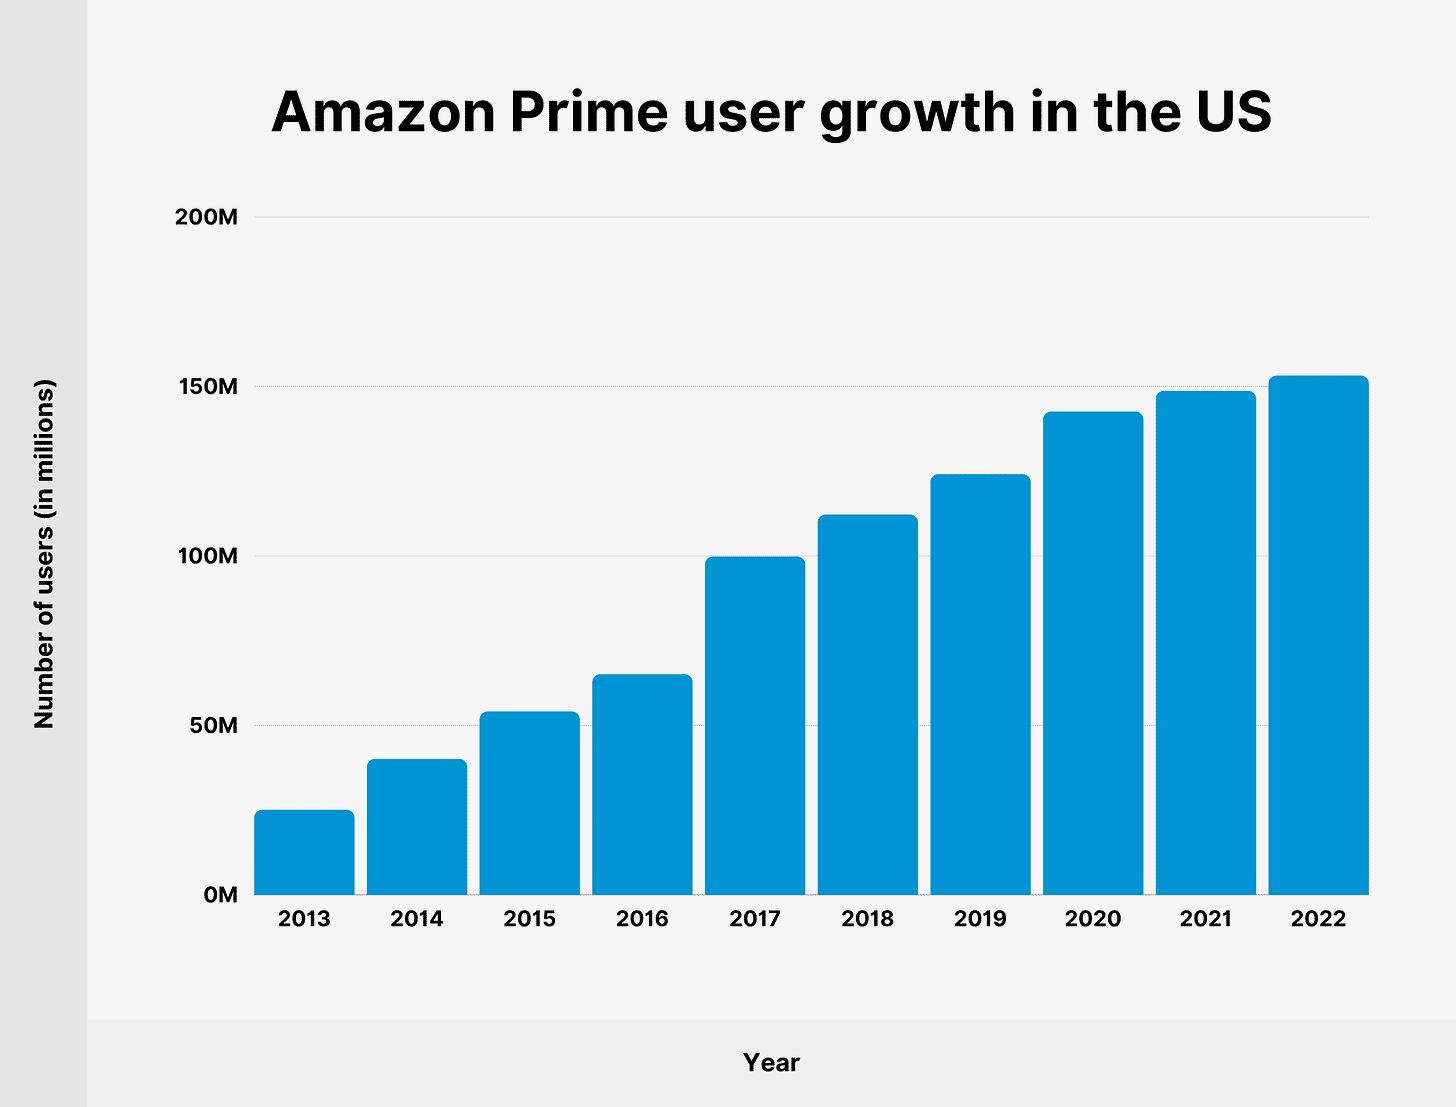 Amazon Prime user growth in the US